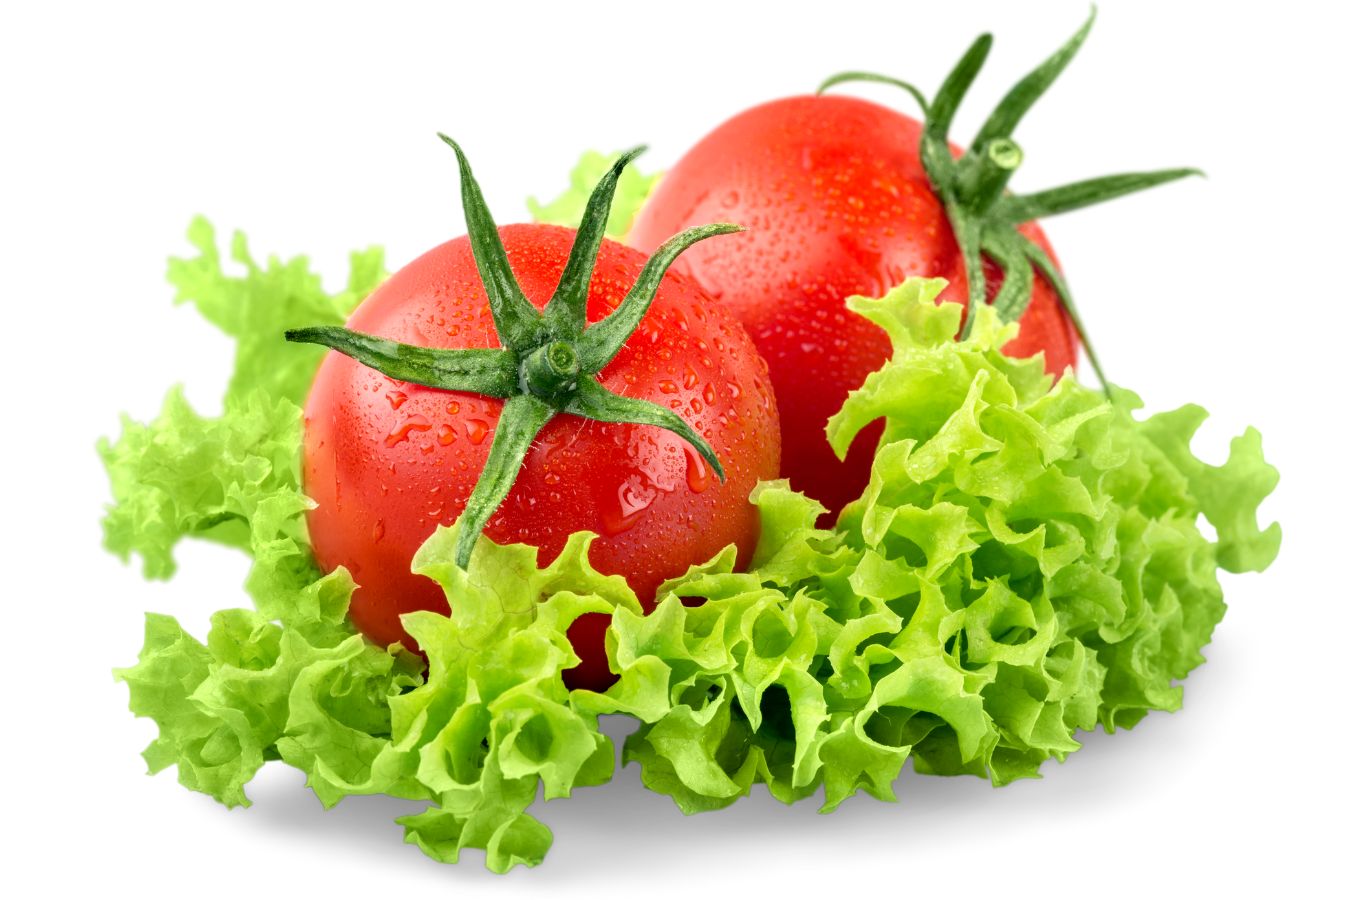 Two tomatoes sitting on a bed of lettuce